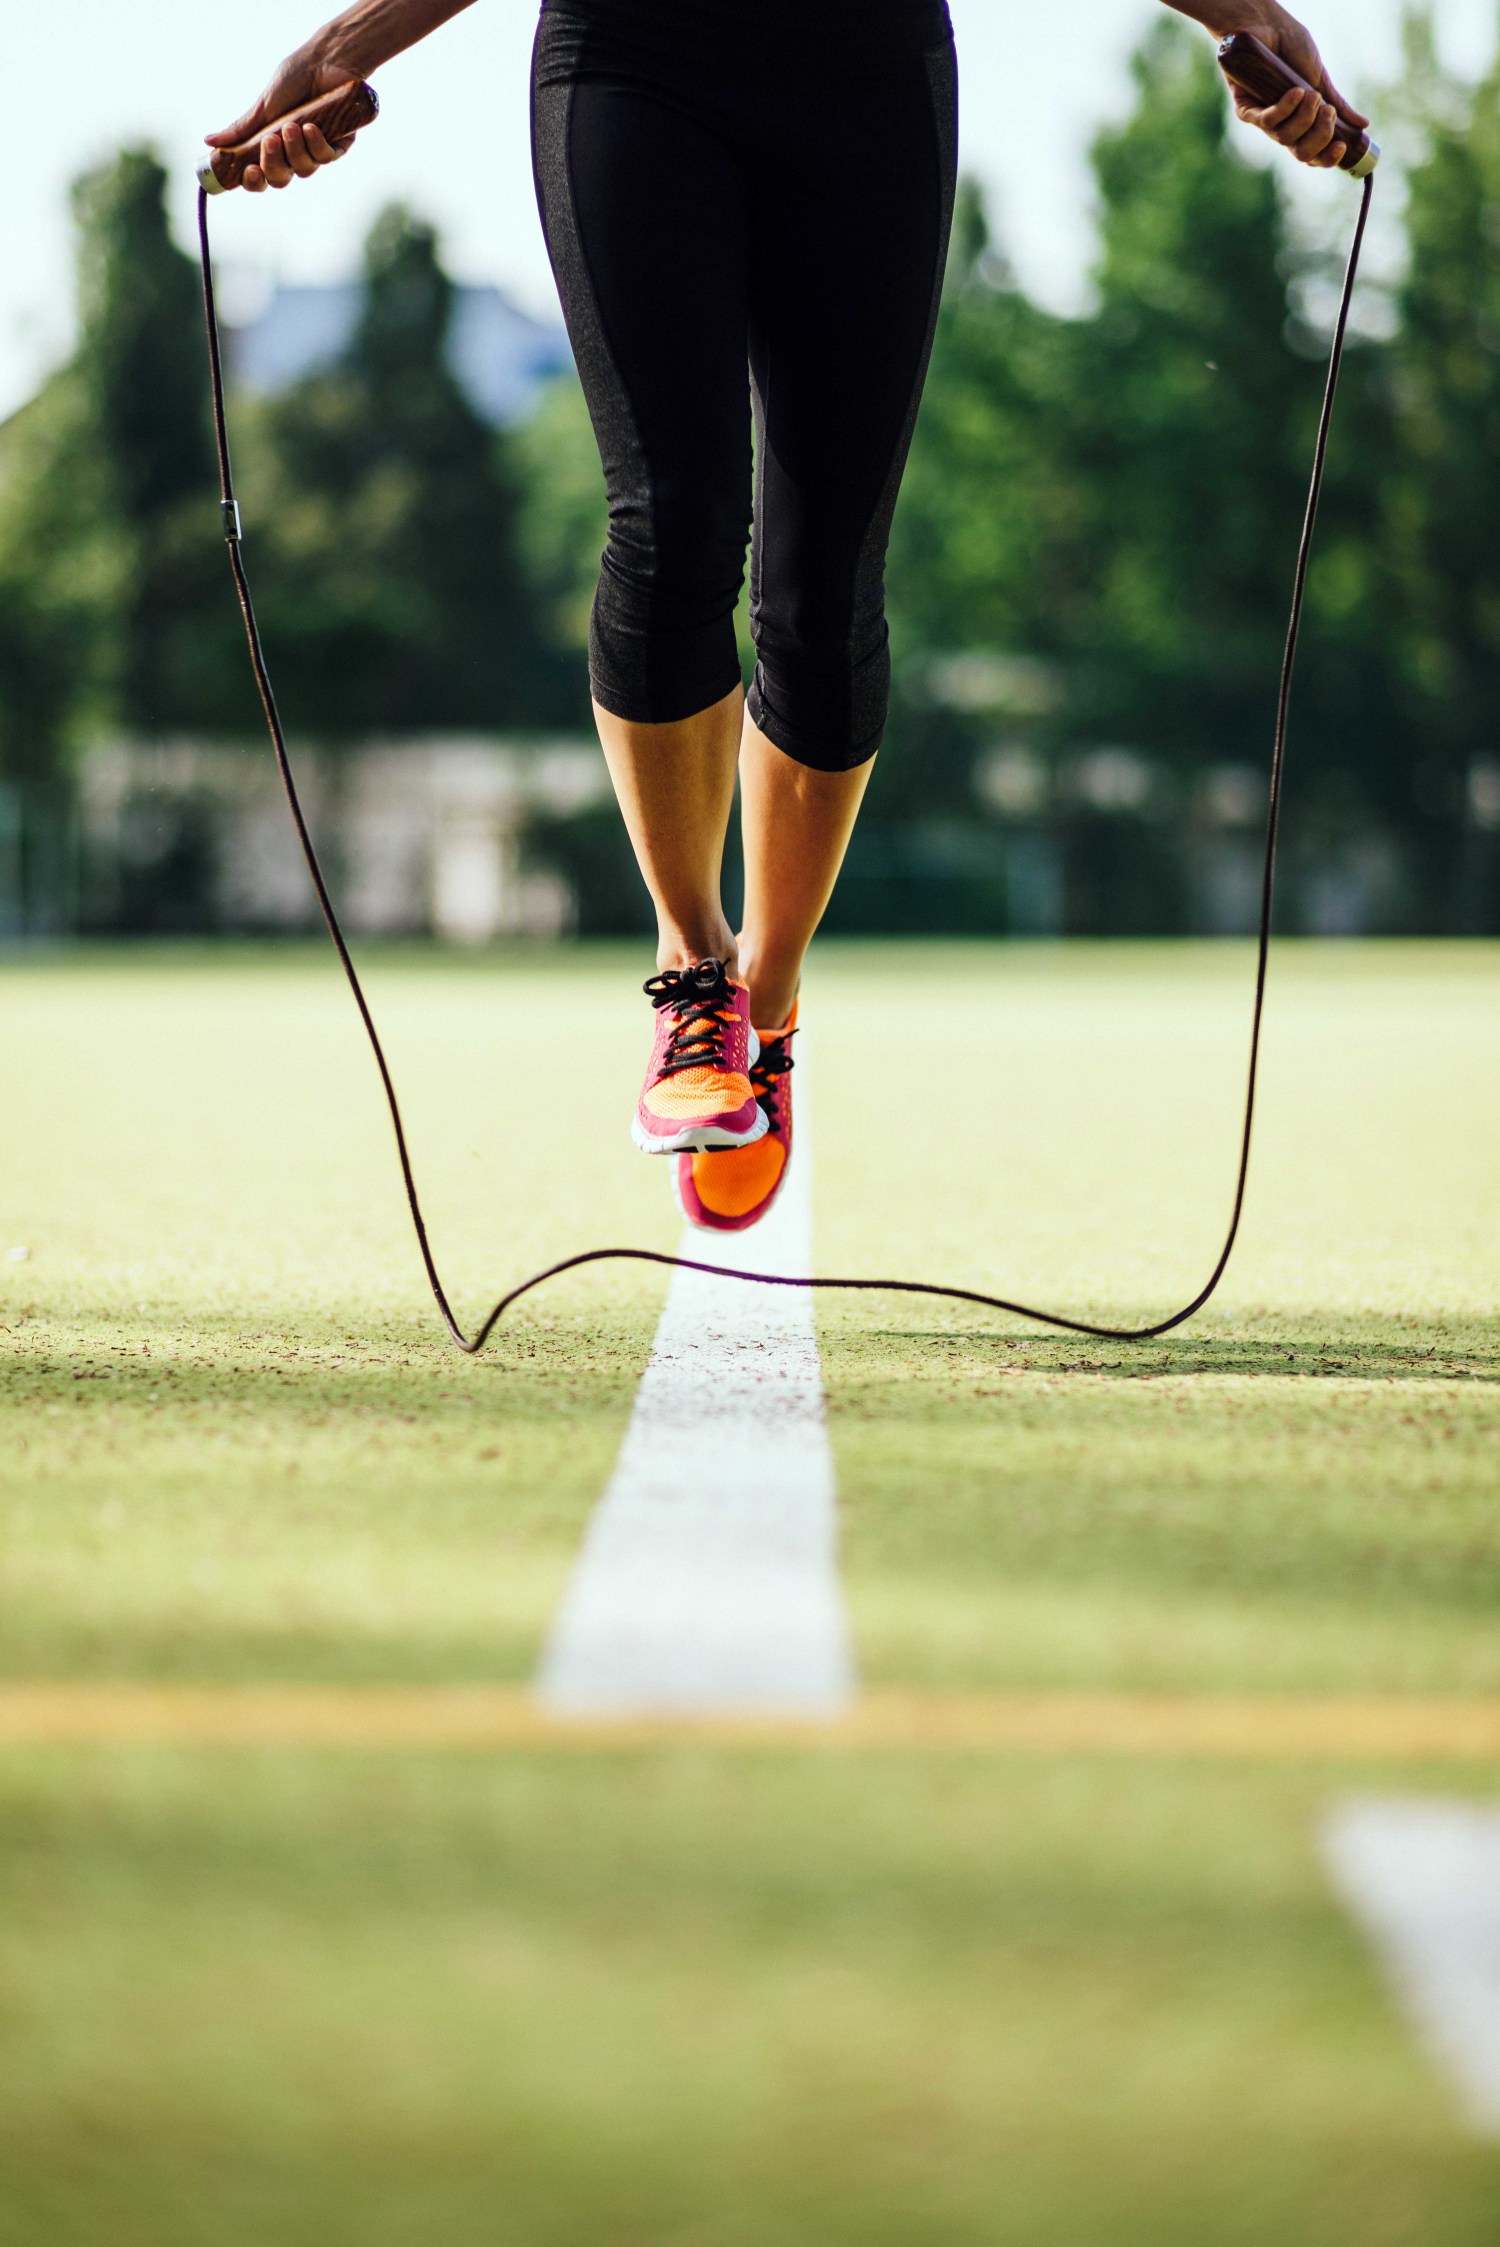 15-Minute Jump Rope Workout For Beginners